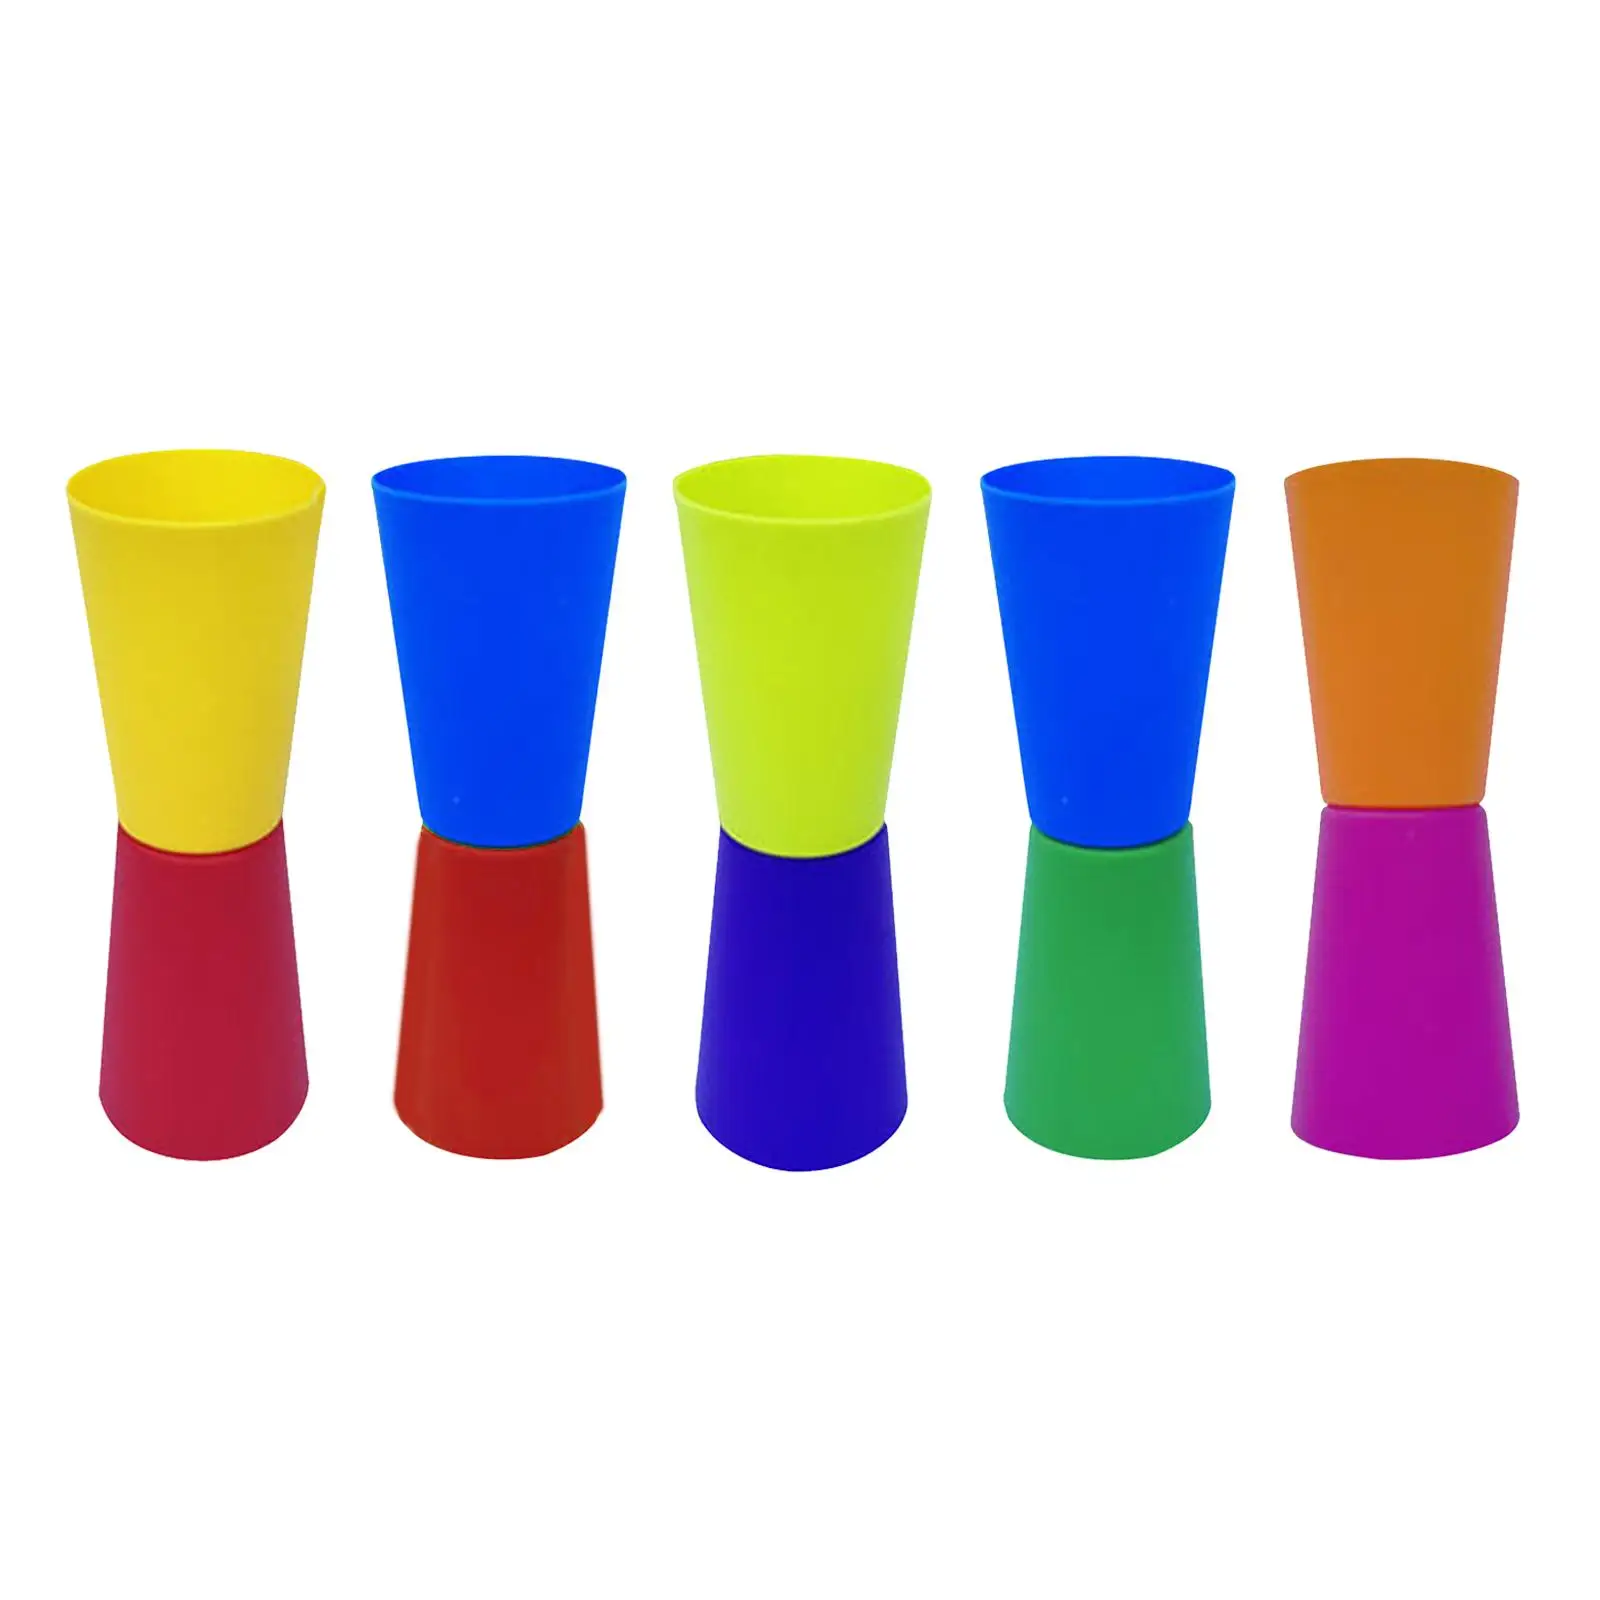 10 Pieces Flip Cups Agility Training Workout Shuttle Run Fitness Running Exercise Aid for Outdoor Rugby Football Events with Net